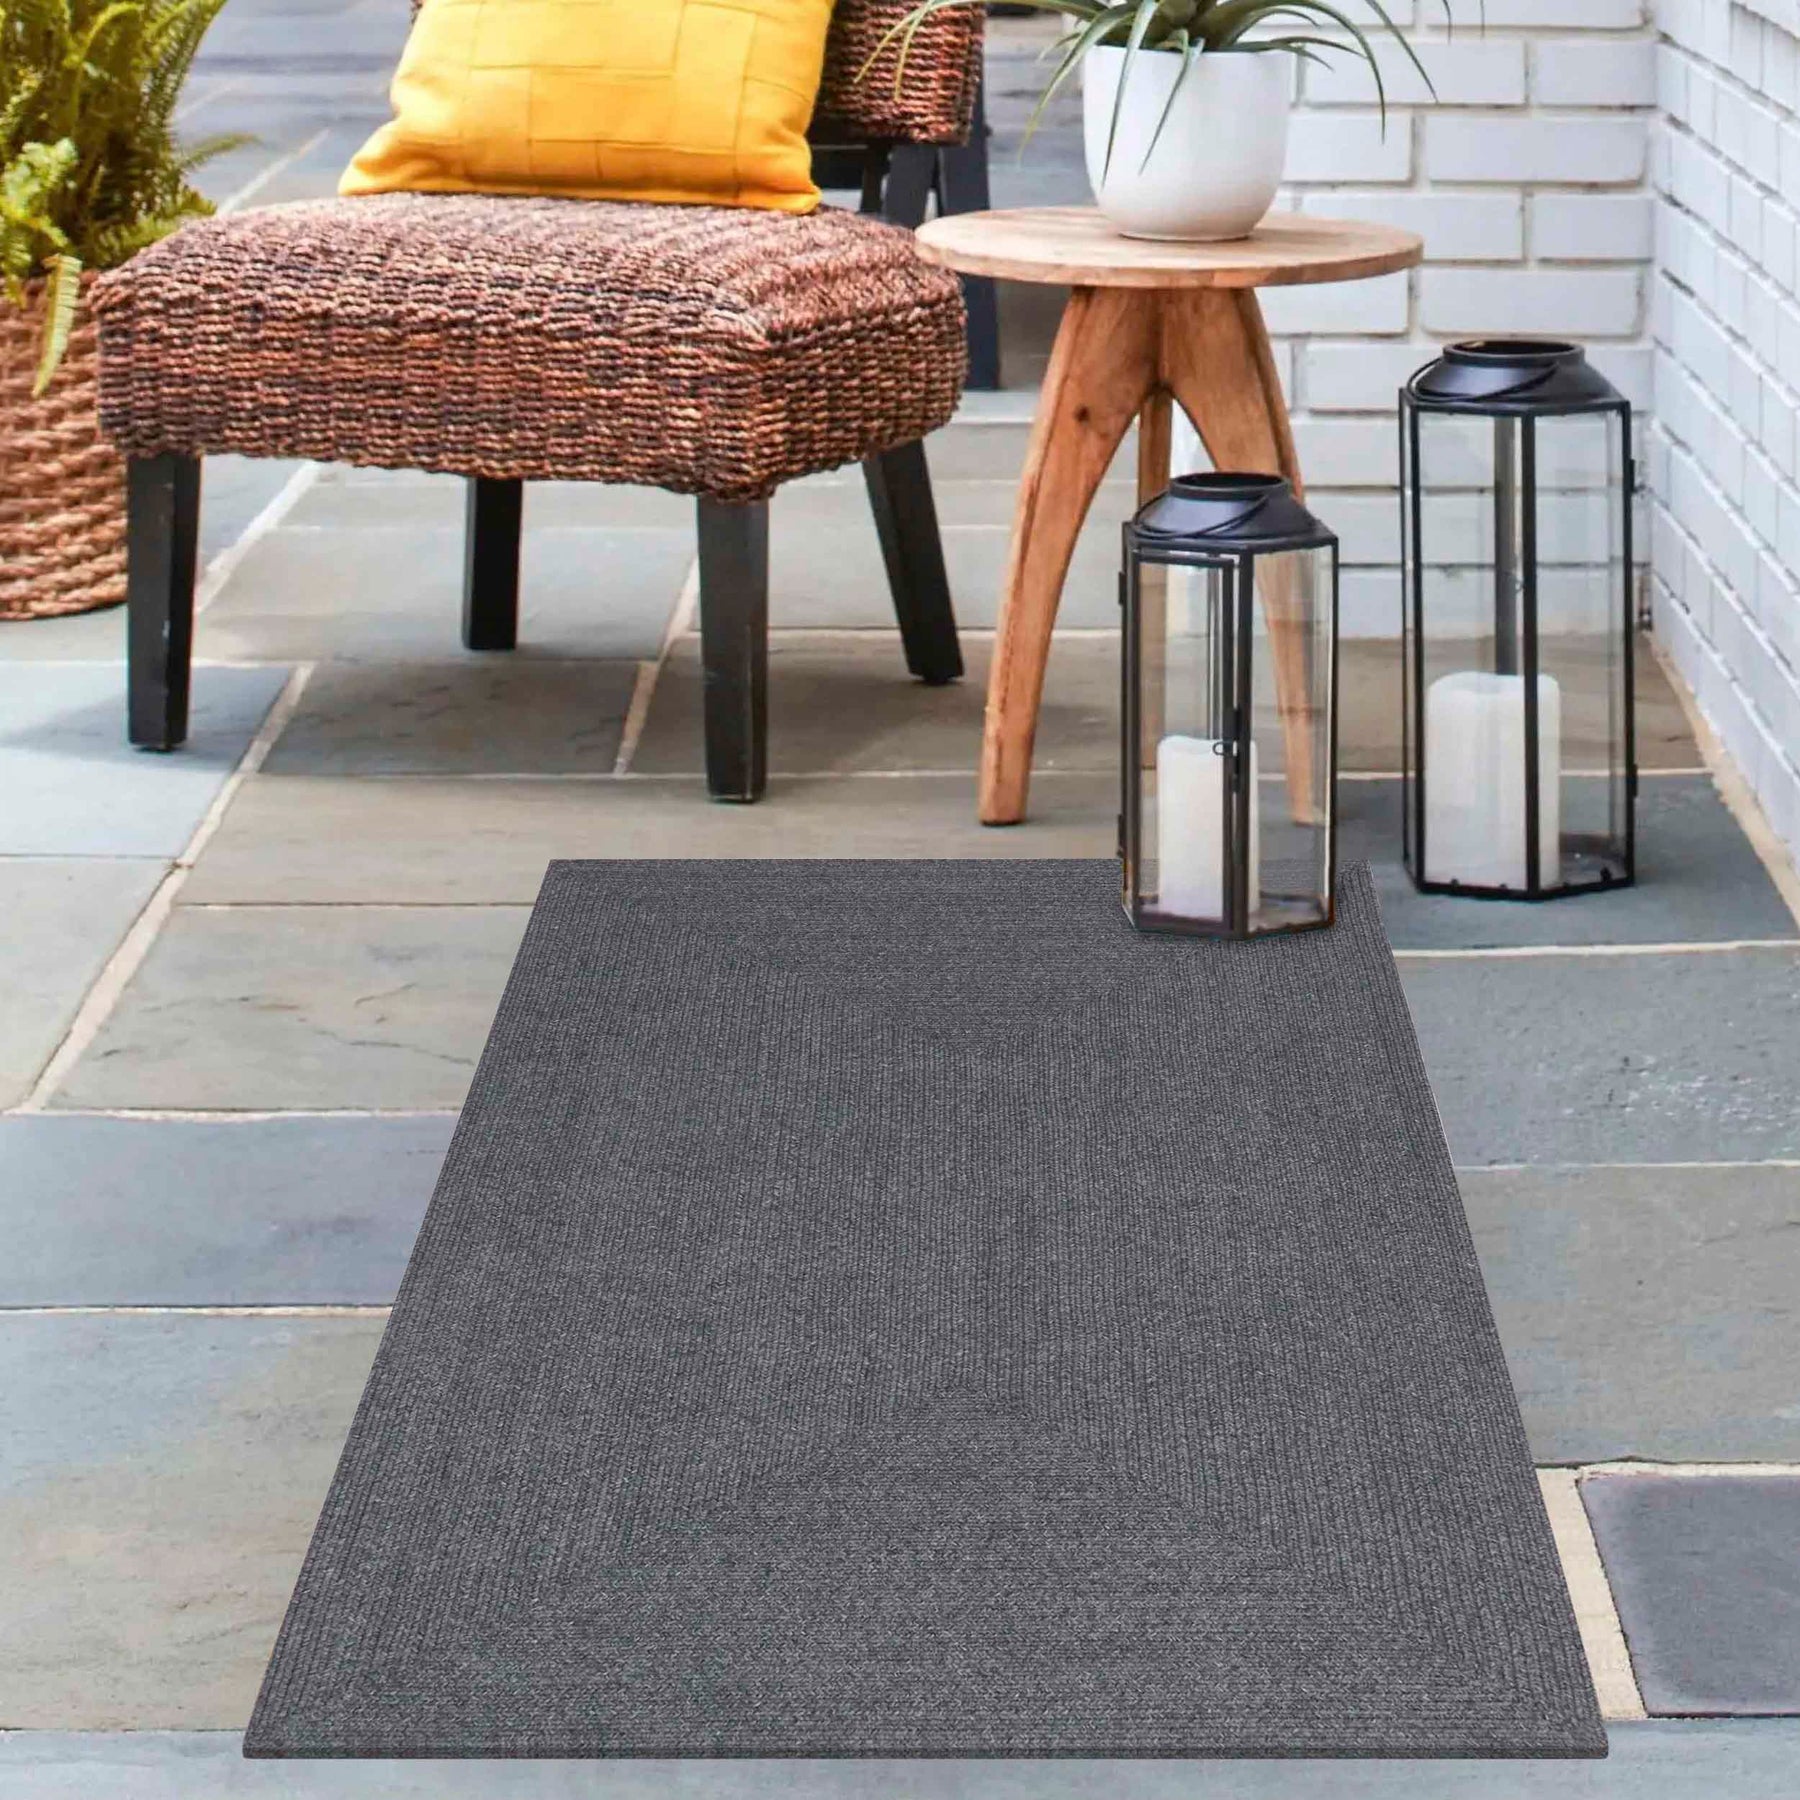 Bohemian Indoor Outdoor Rugs Solid Rectangle Braided Area Rug - Charcoal